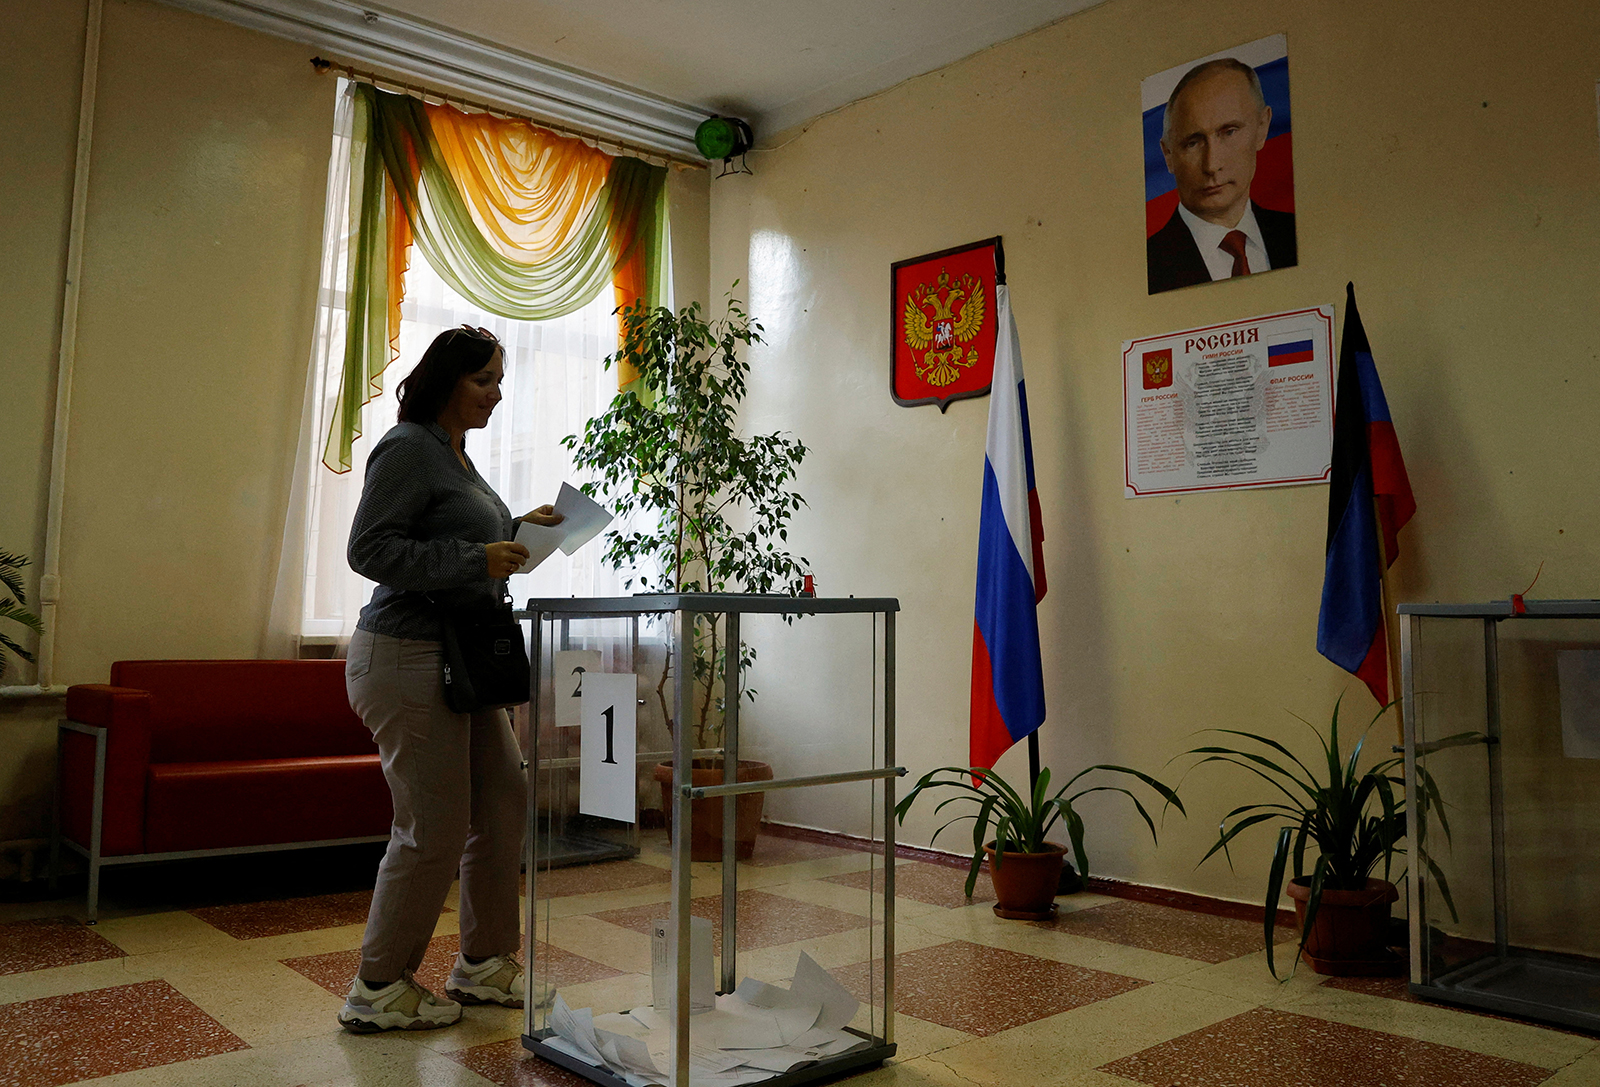 A voter casts her ballot at a polling station during local elections in Donetsk, Russian-controlled Ukraine, on September 9.